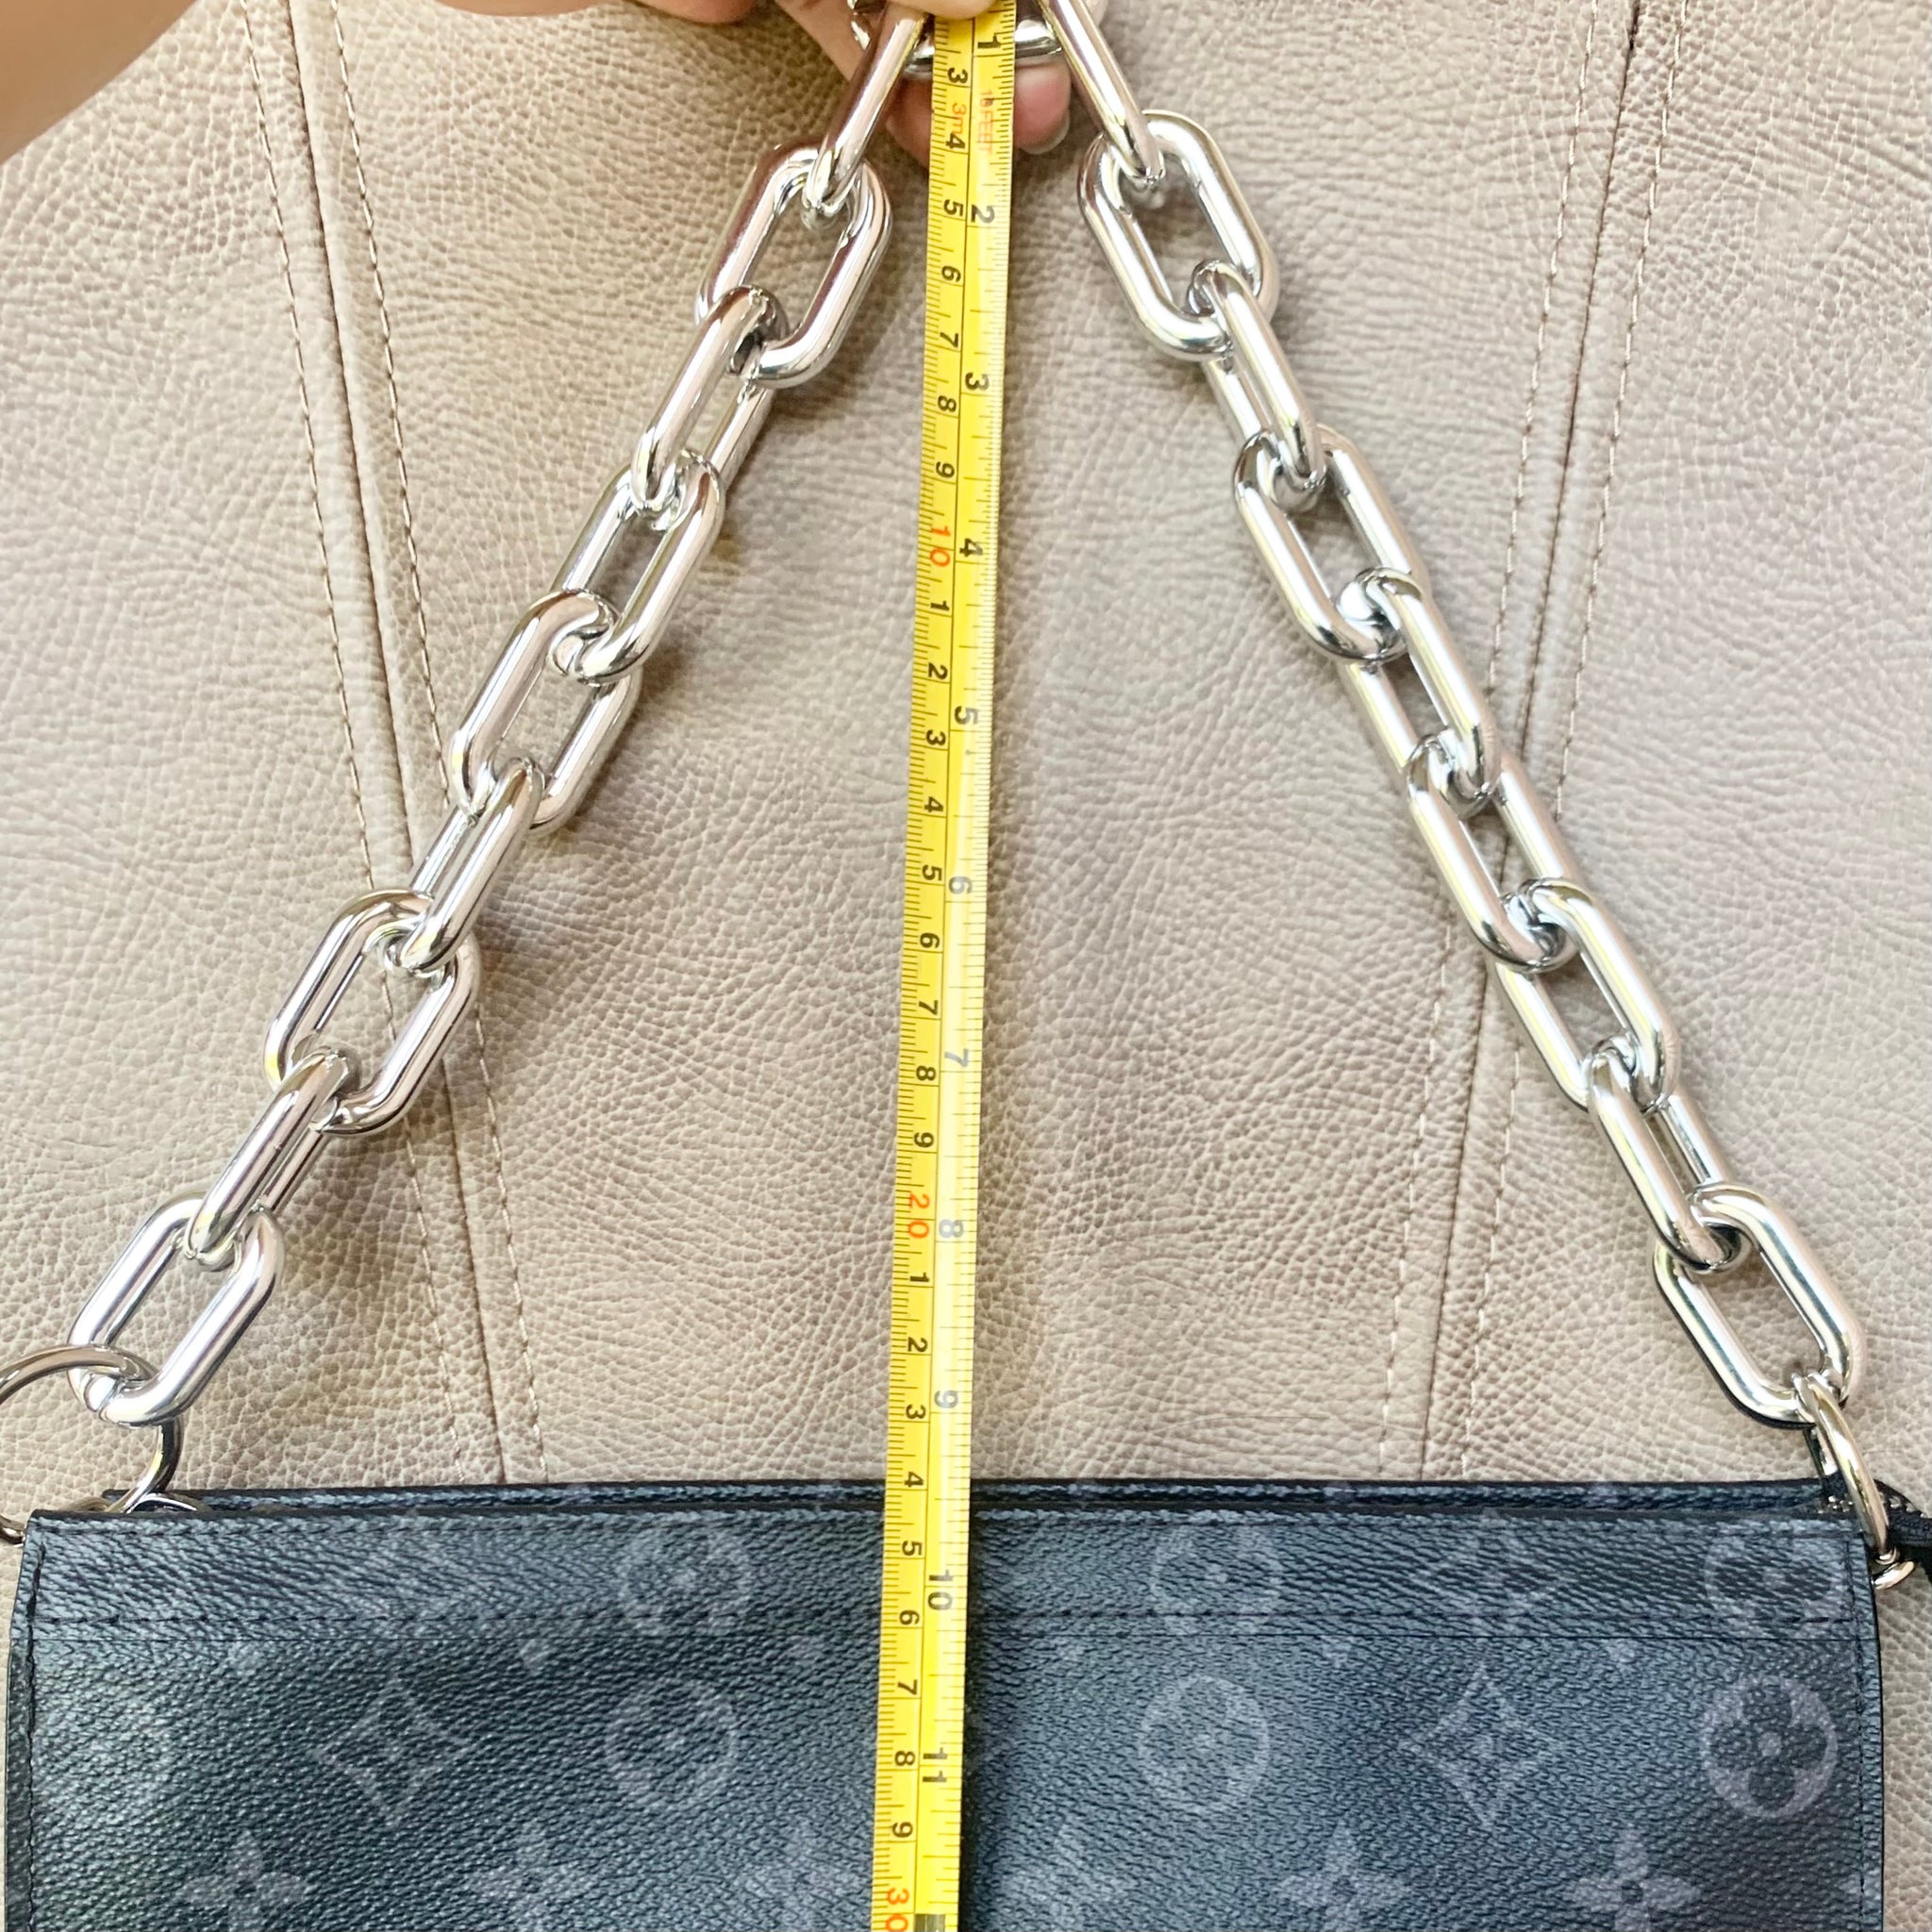 GOLD THICK PURSE CHAIN STRAP FOR LV TOILETRY 26 MAKE-UP POUCH T26